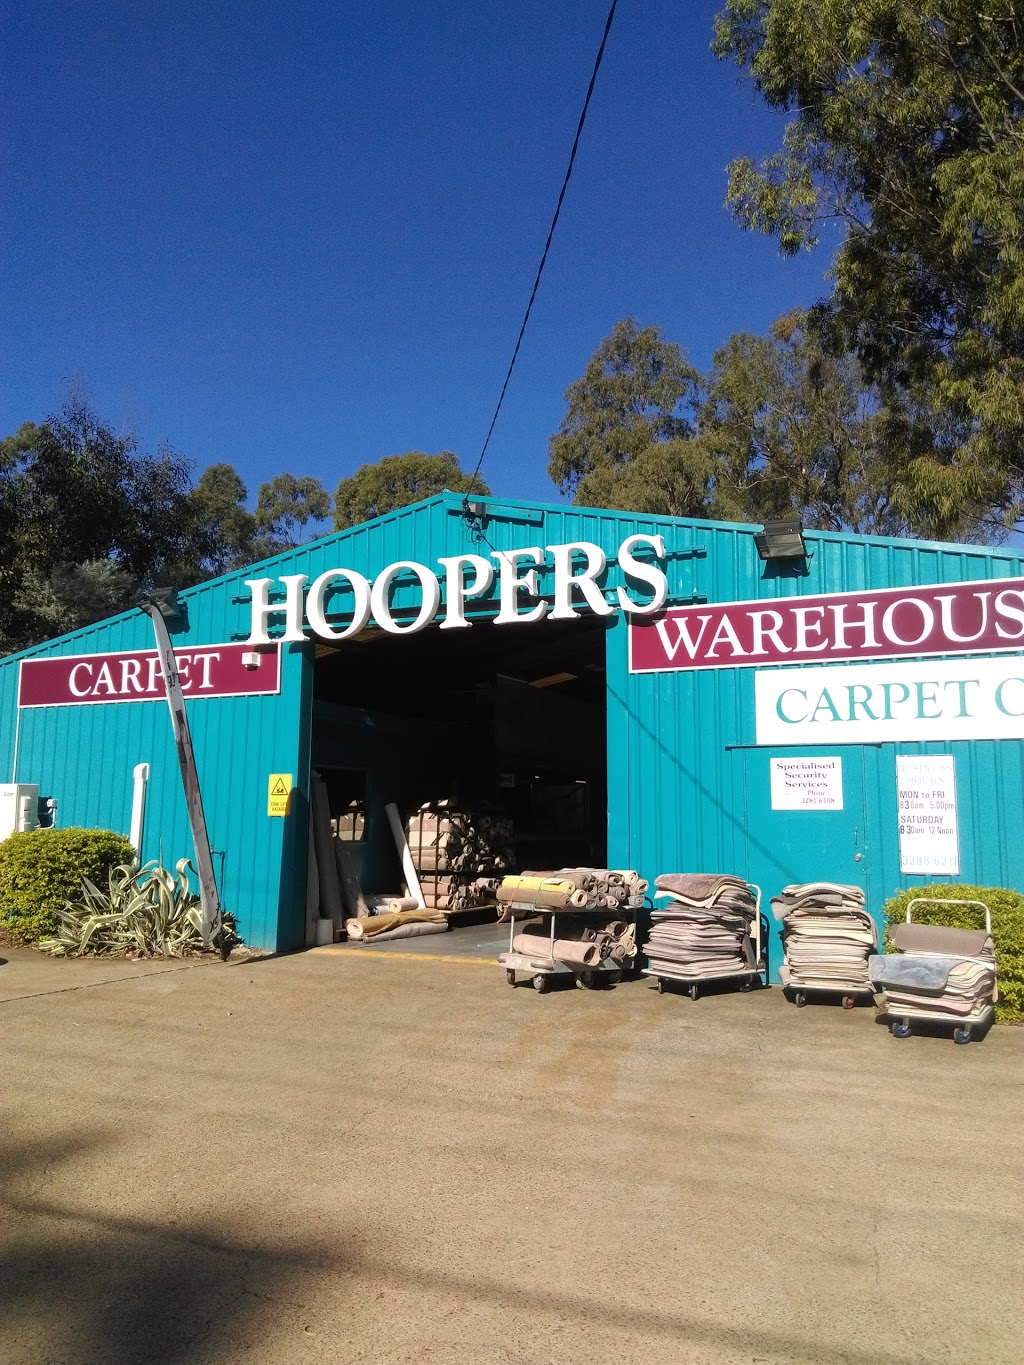 Hoopers Carpet One Warehouse Ipswich | home goods store | 458 Warwick Rd, Yamanto QLD 4305, Australia | 0732886211 OR +61 7 3288 6211